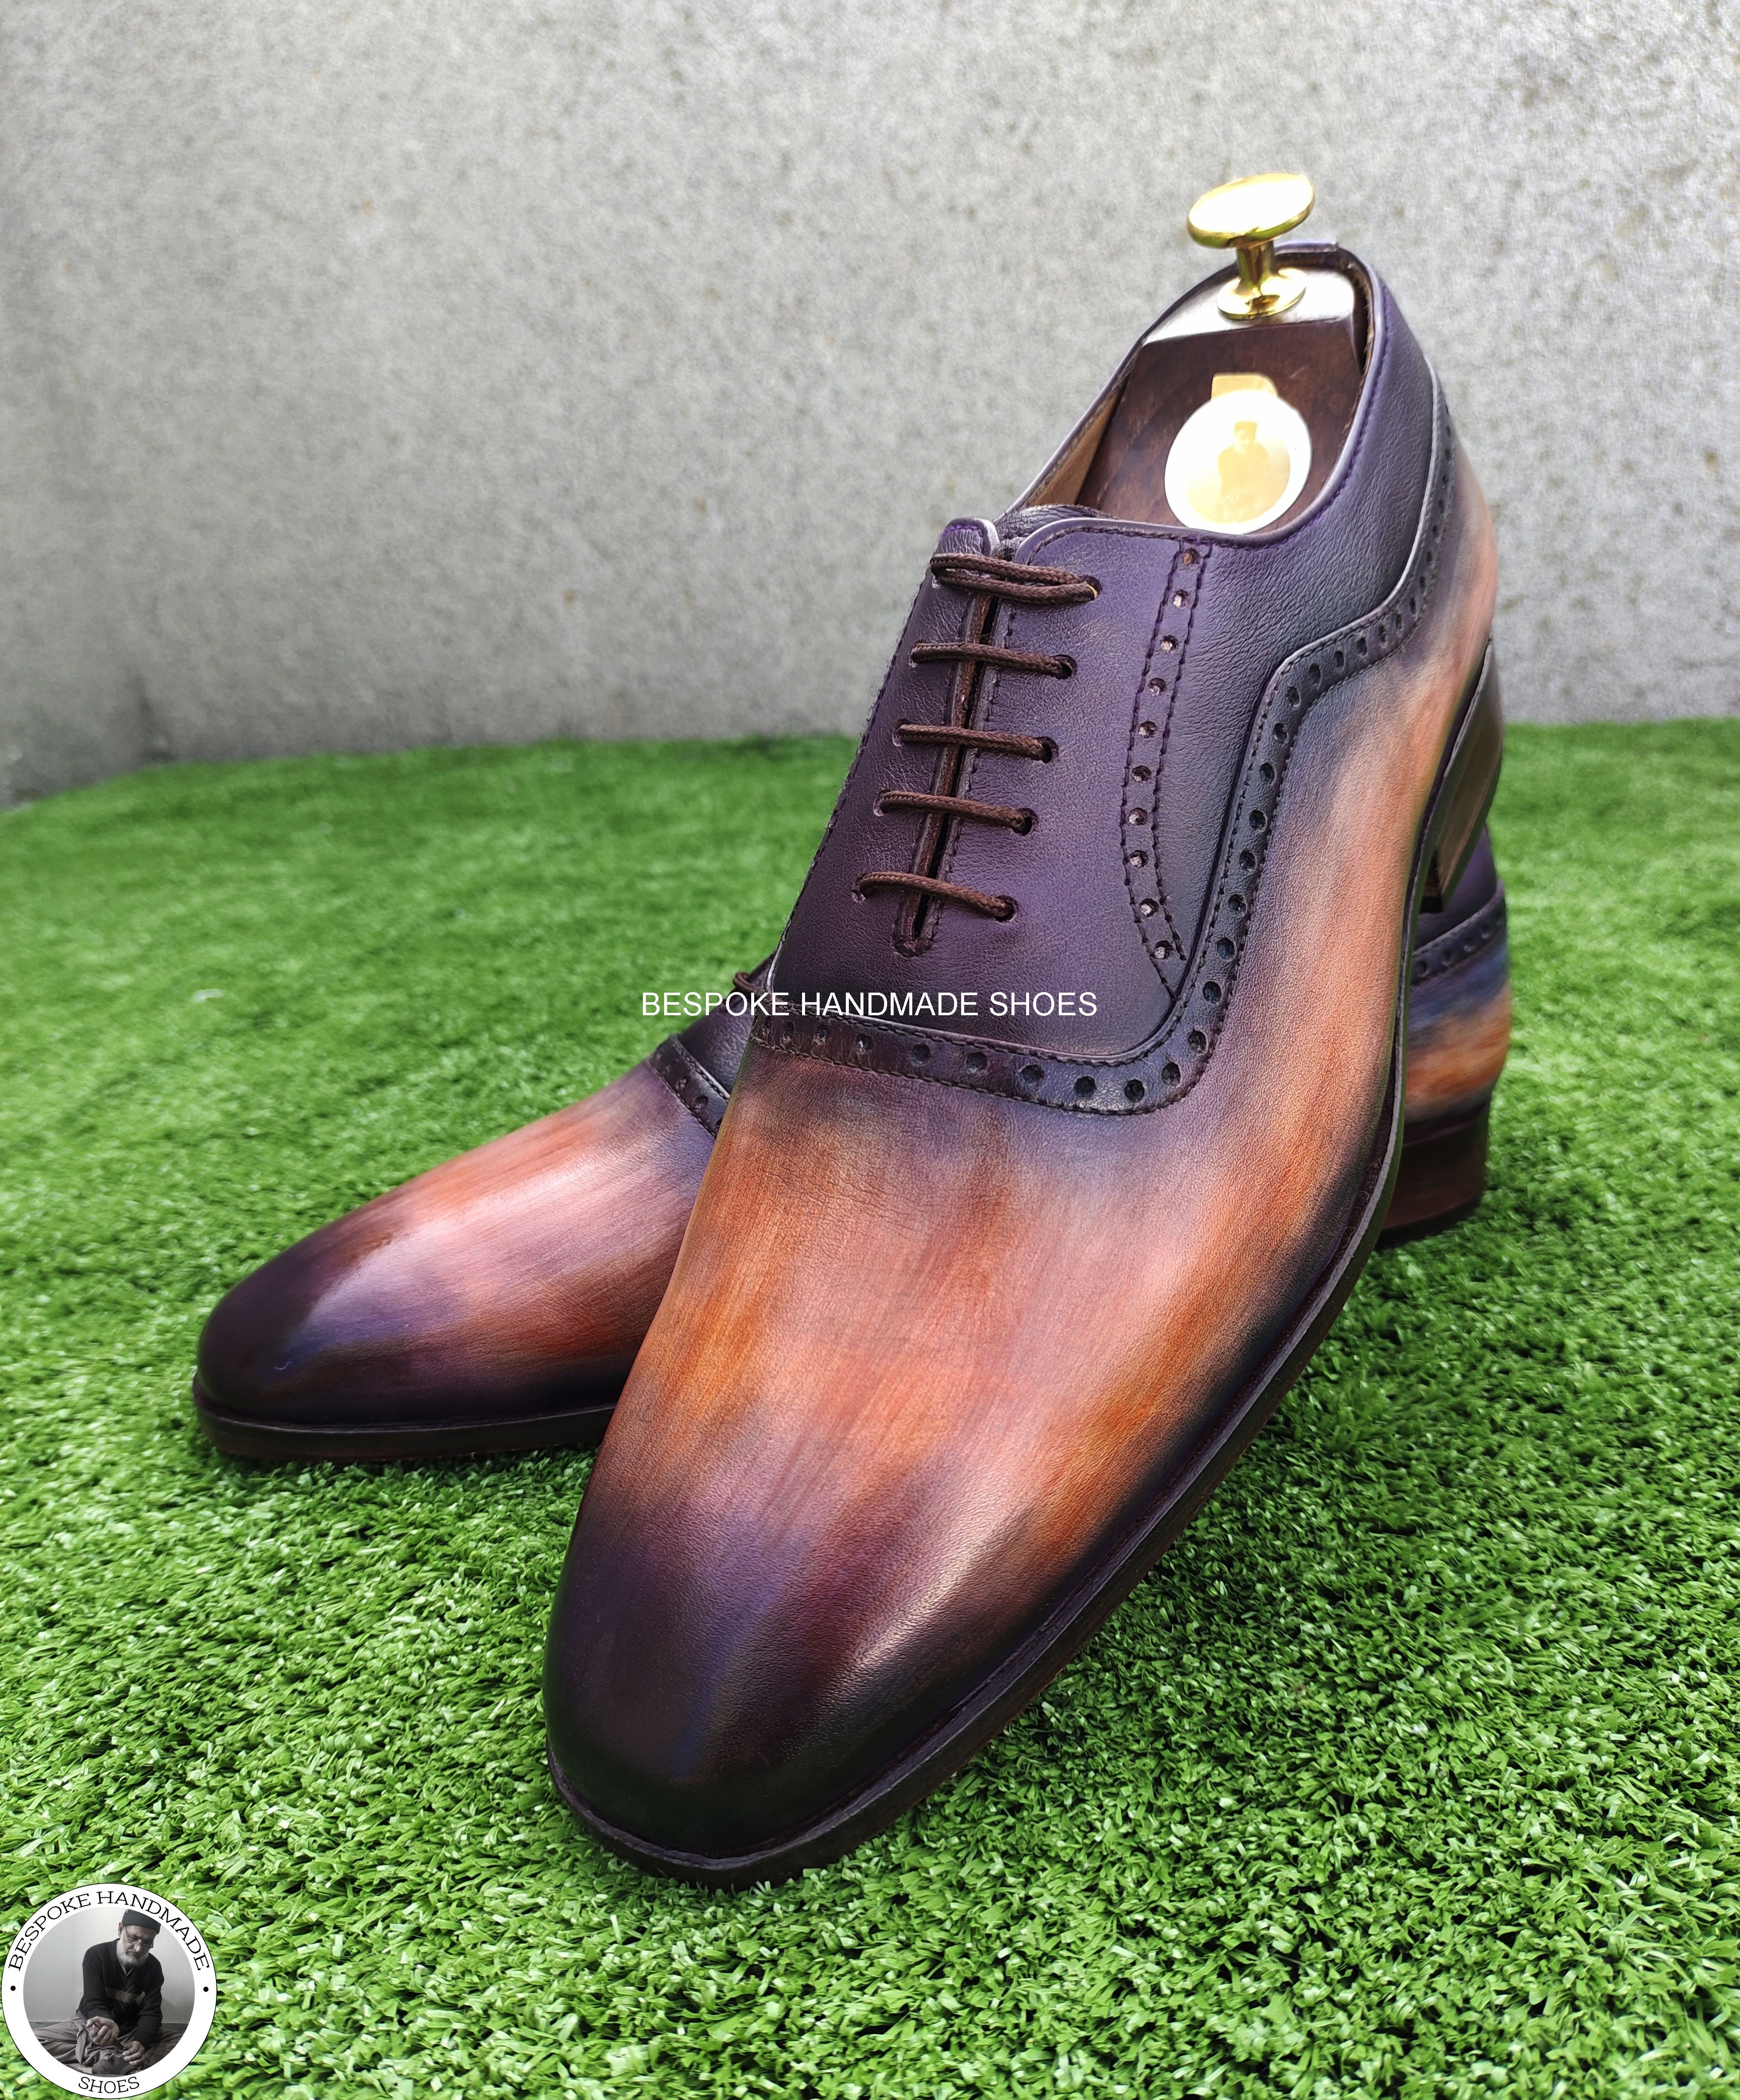 Bespoke Real Leather Shoes, Two Tone Oxford Wholecut Lace up Dress / Formal Shoe